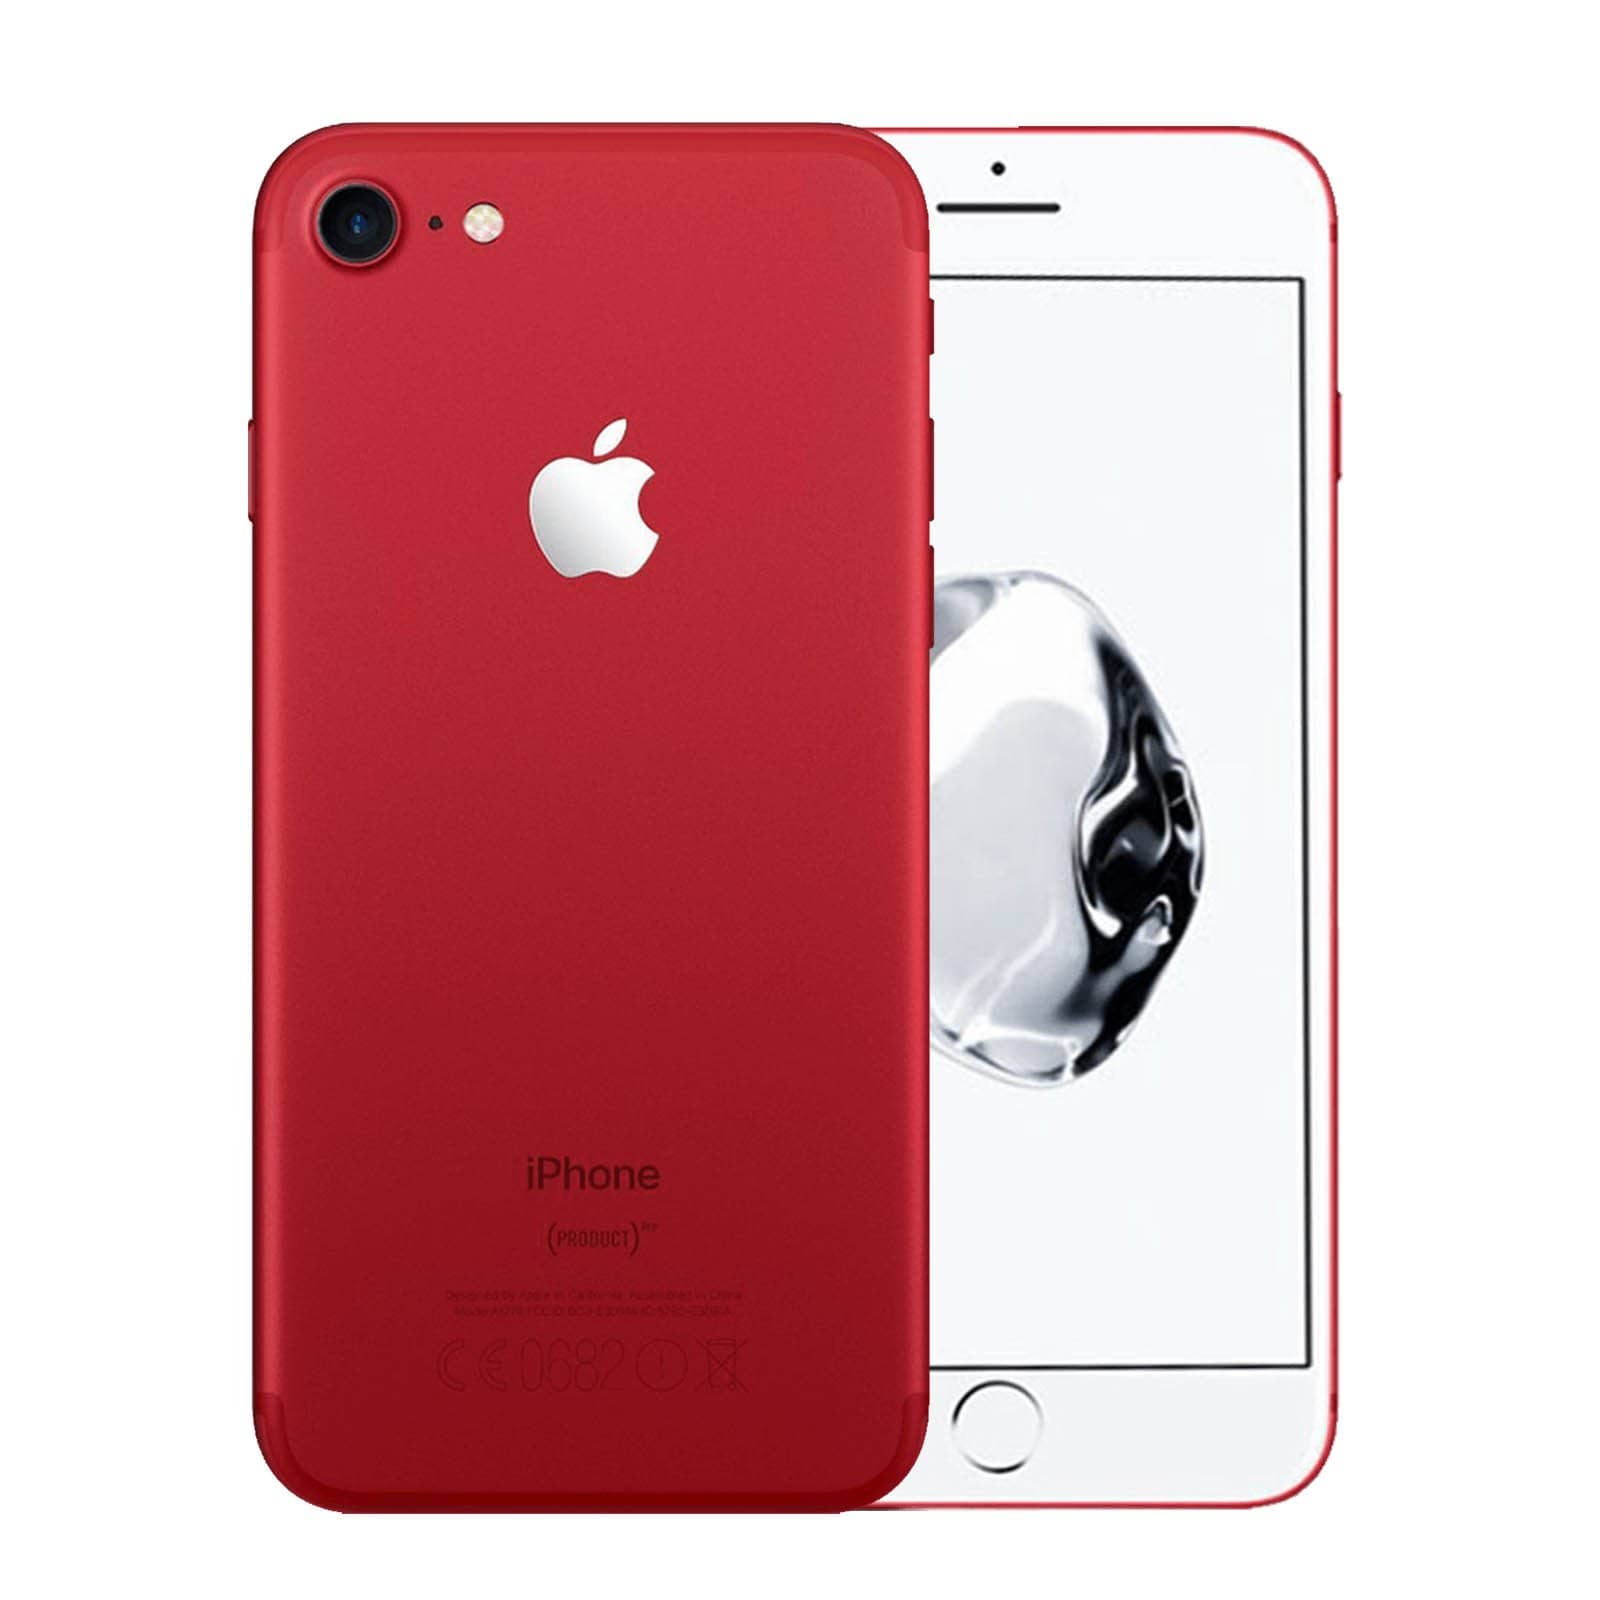 Apple iPhone 7 256GB Product Red Good - Unlocked 256GB Red Good